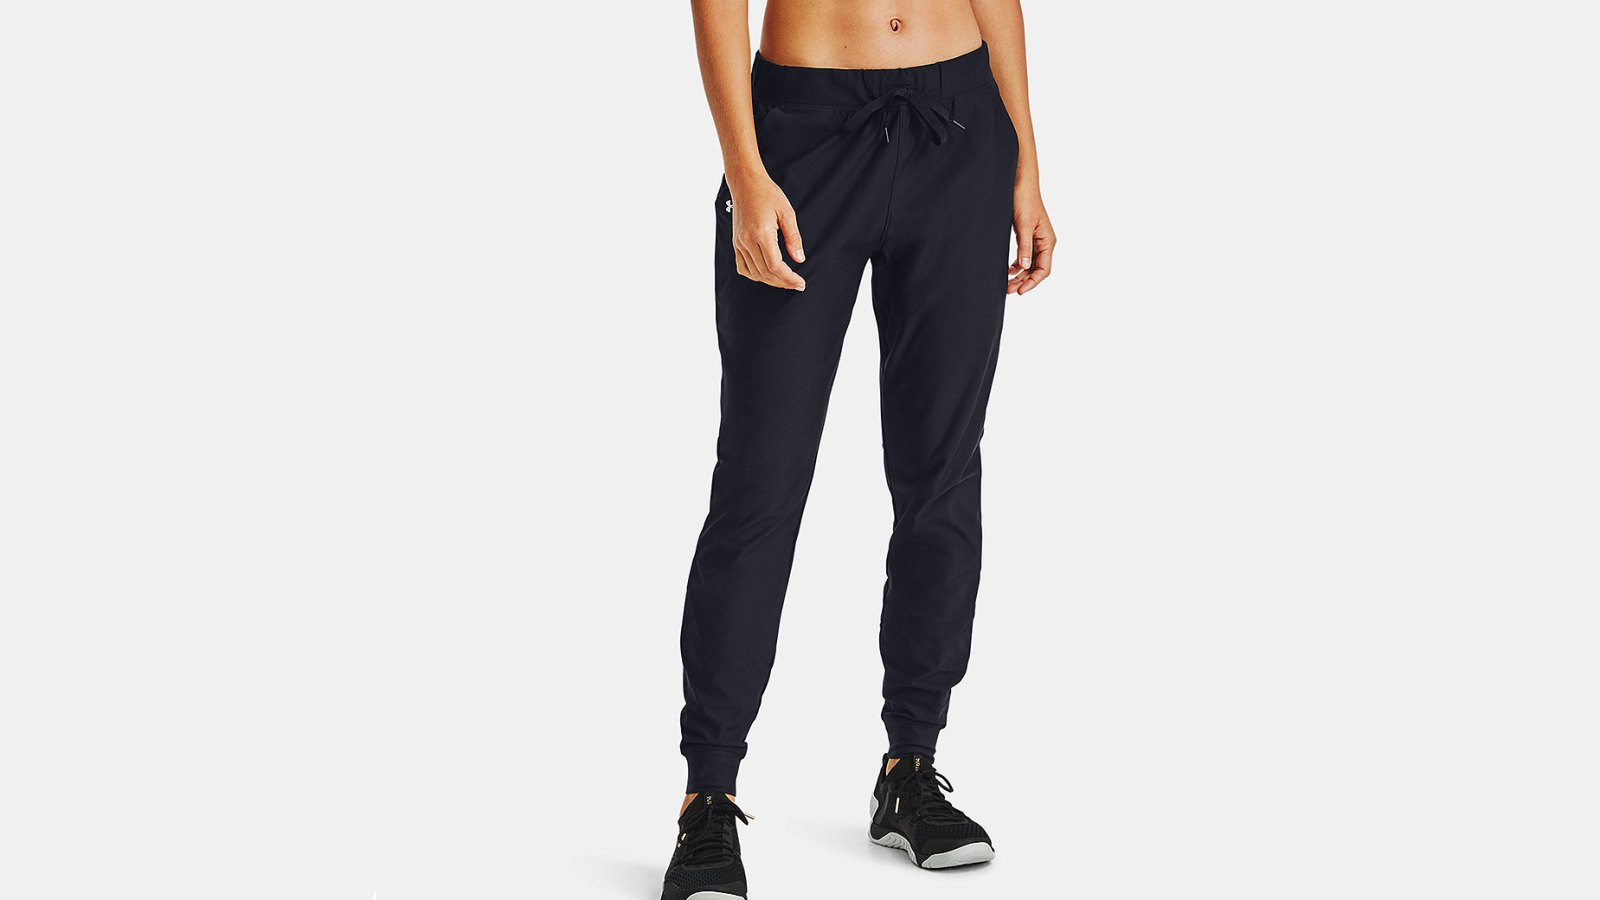 Under Armour Vanish Joggers Are So Flattering for Pear Shapes